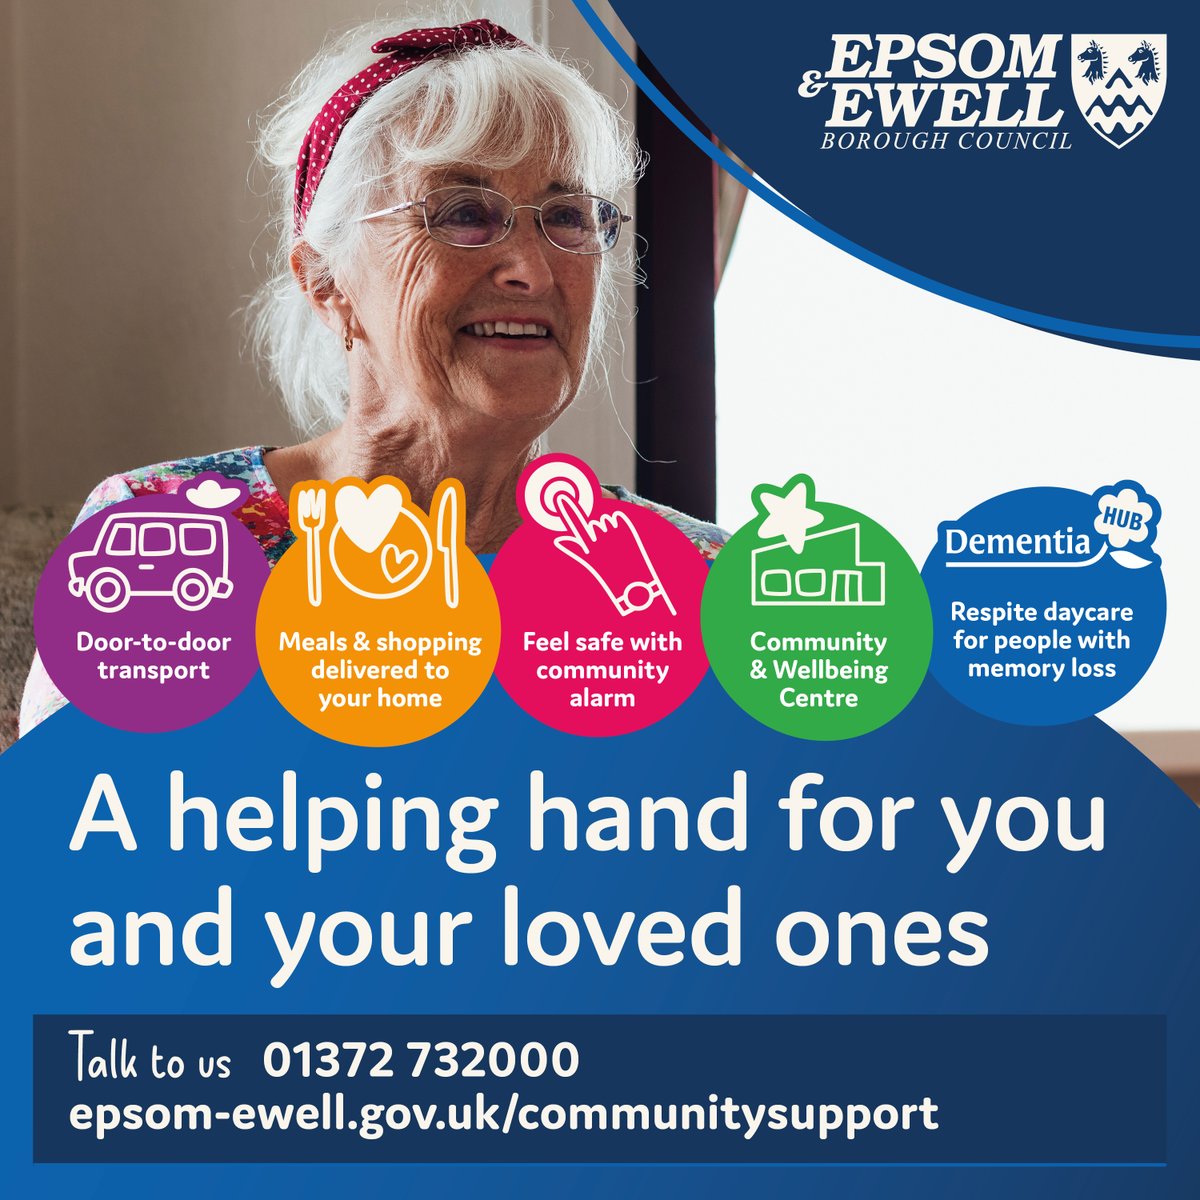 Epsom & Ewell Borough Council launches campaign to tell residents about community support services that offer a helping hand. @EpsomEwellBC ow.ly/5Uh530sBtAc